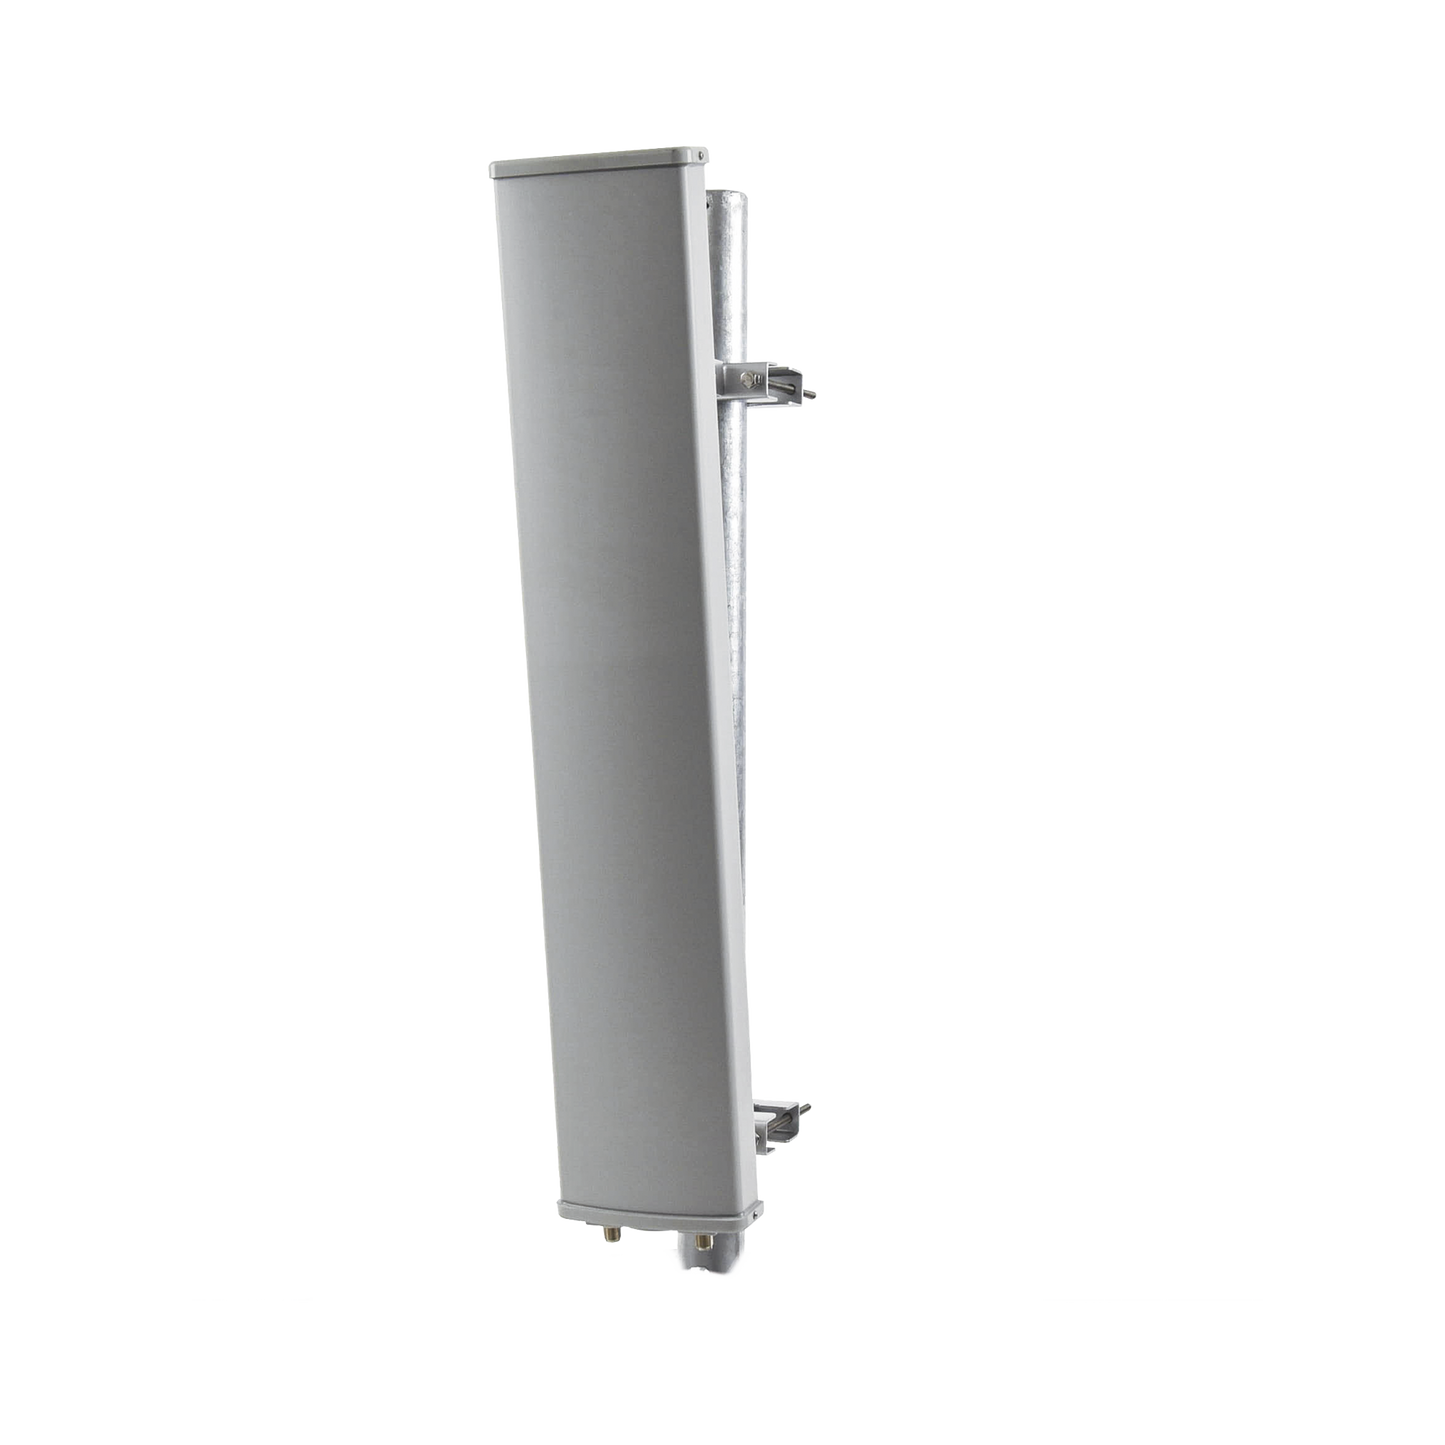 120 ° Sector Antenna, 2.4 GHz, 16 dBi gain, N-female connectors, includes mounting